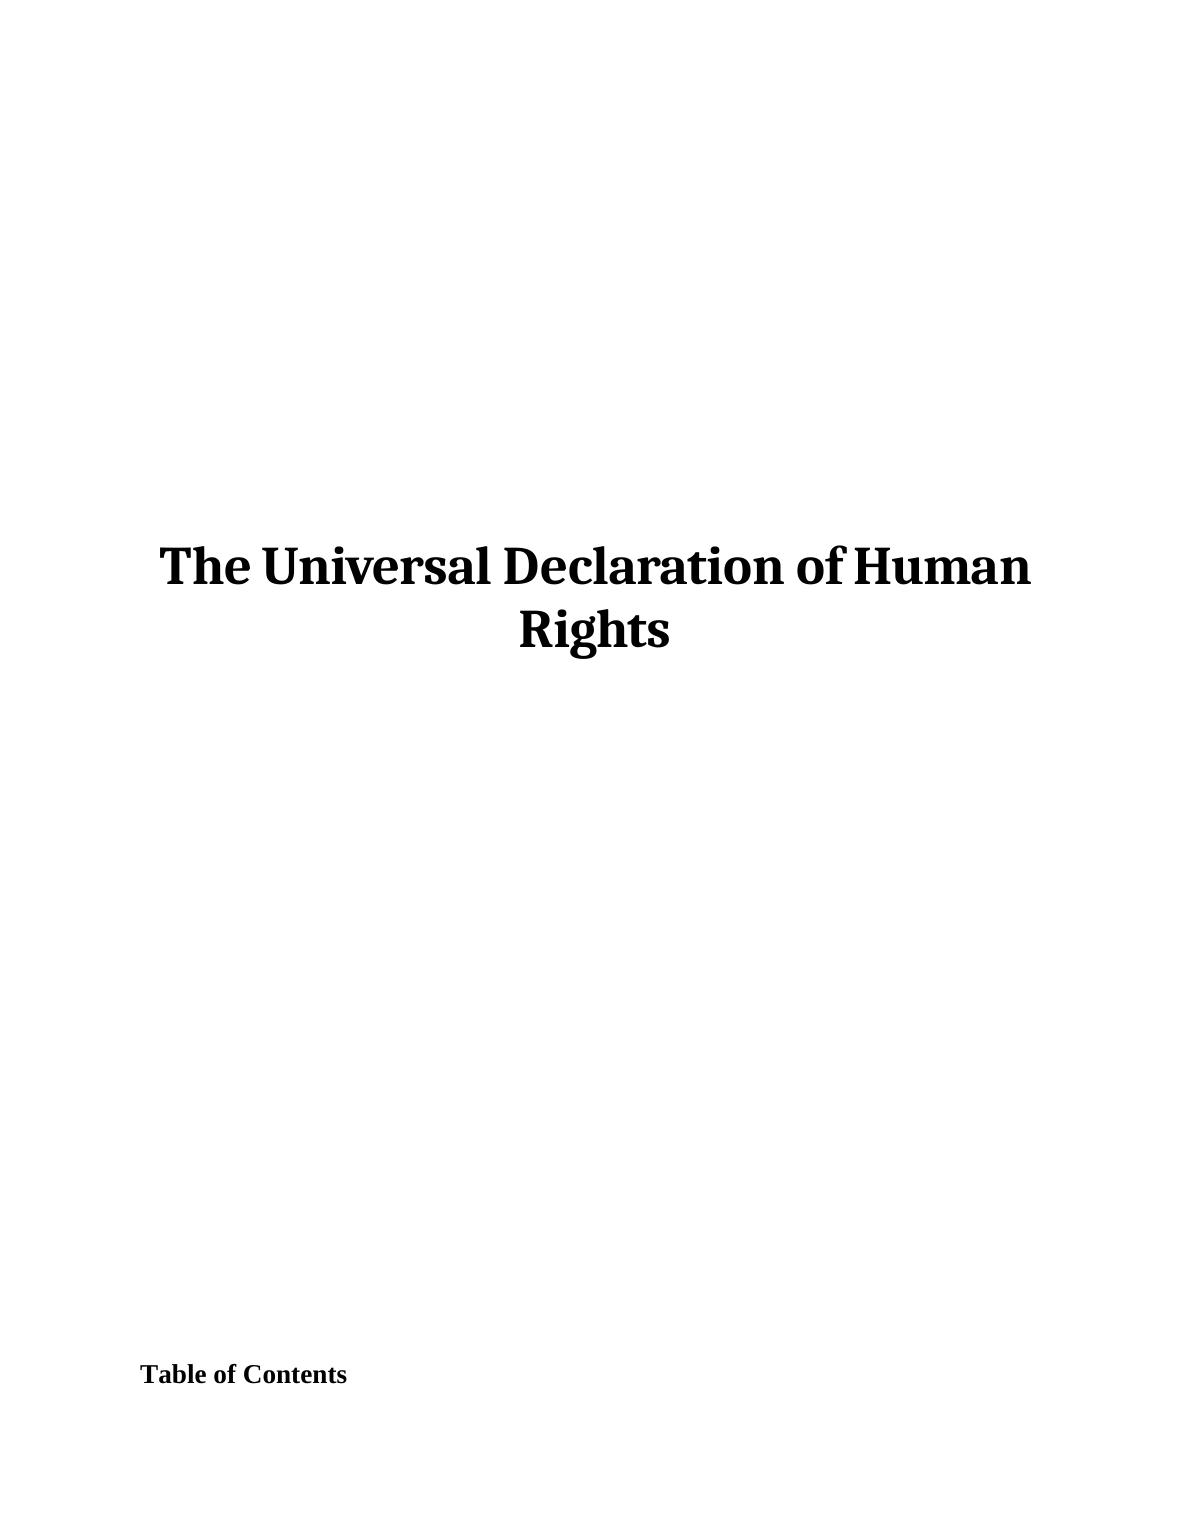 Universal Declaration of Human Rights Assignment_1